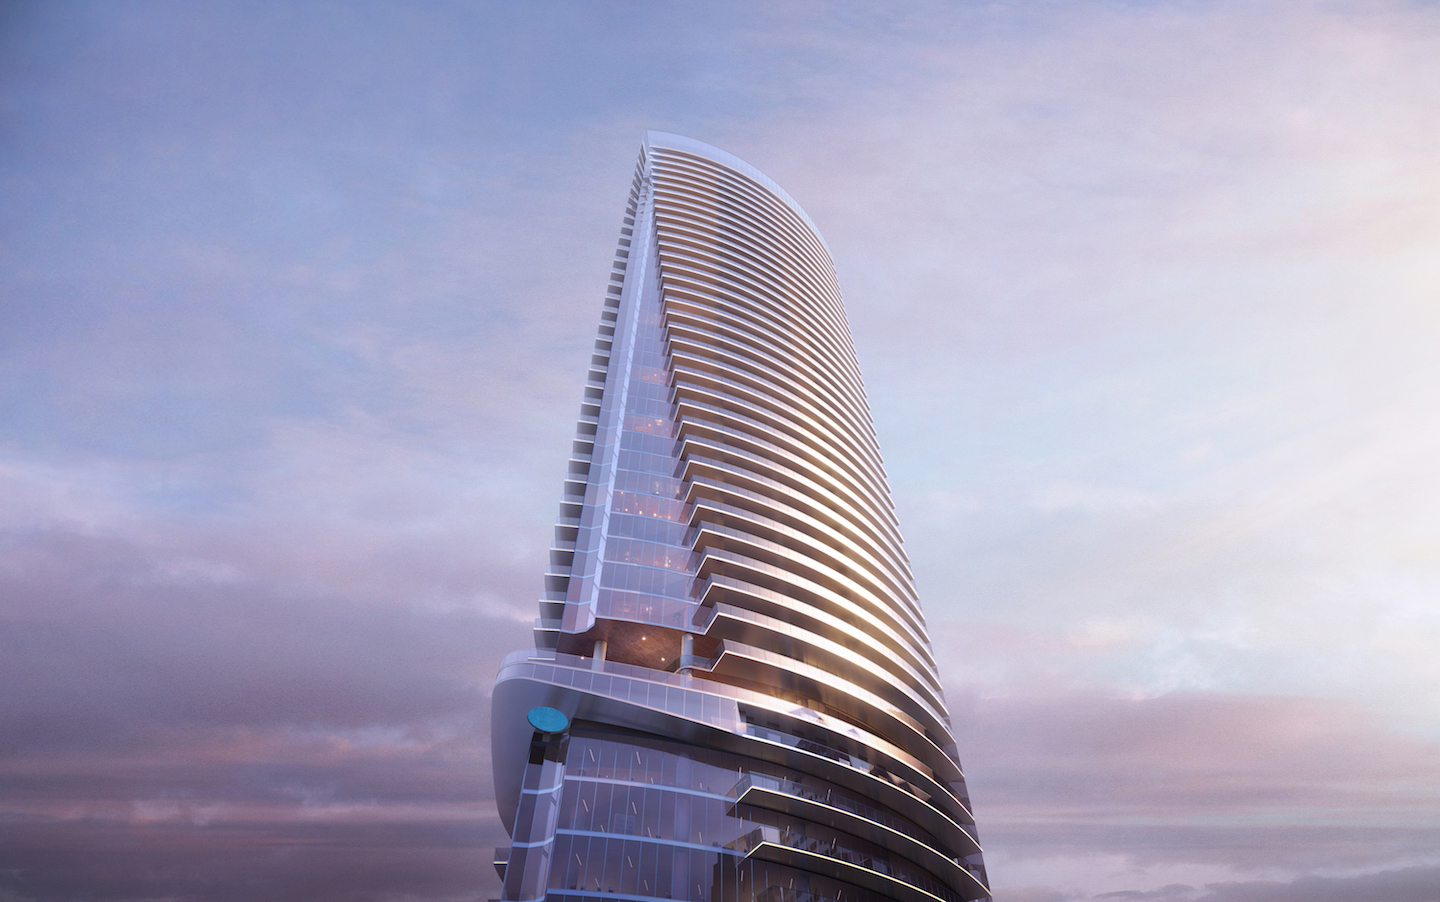 At more than 50 stories, the sail-shaped Riverwalk Place will be the tallest building on the Gulf Coast when it's complete. Photo courtesy of Gensler.